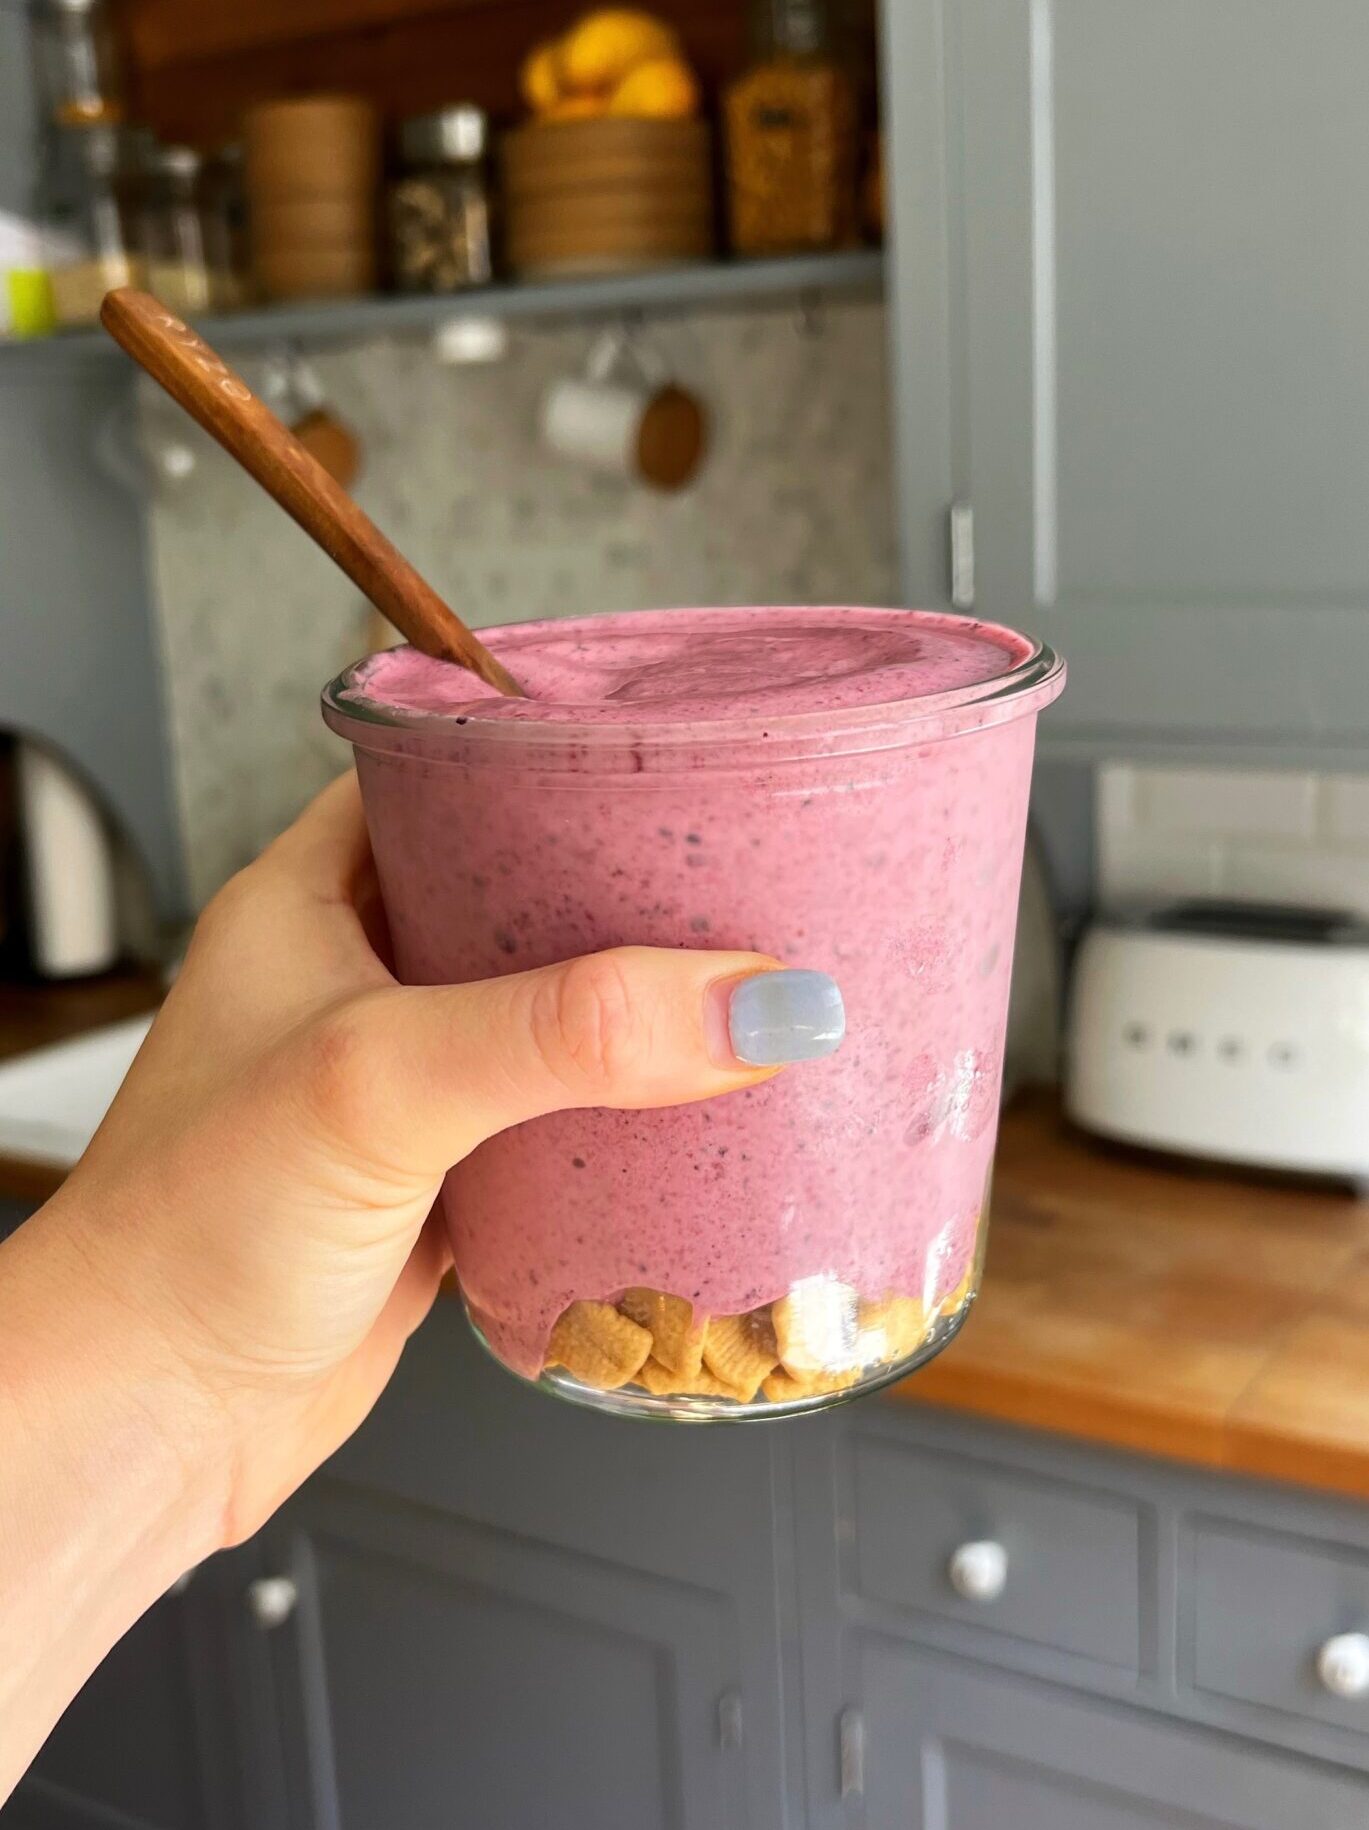 A side view of the berry cheesecake smoothie being held with a hand